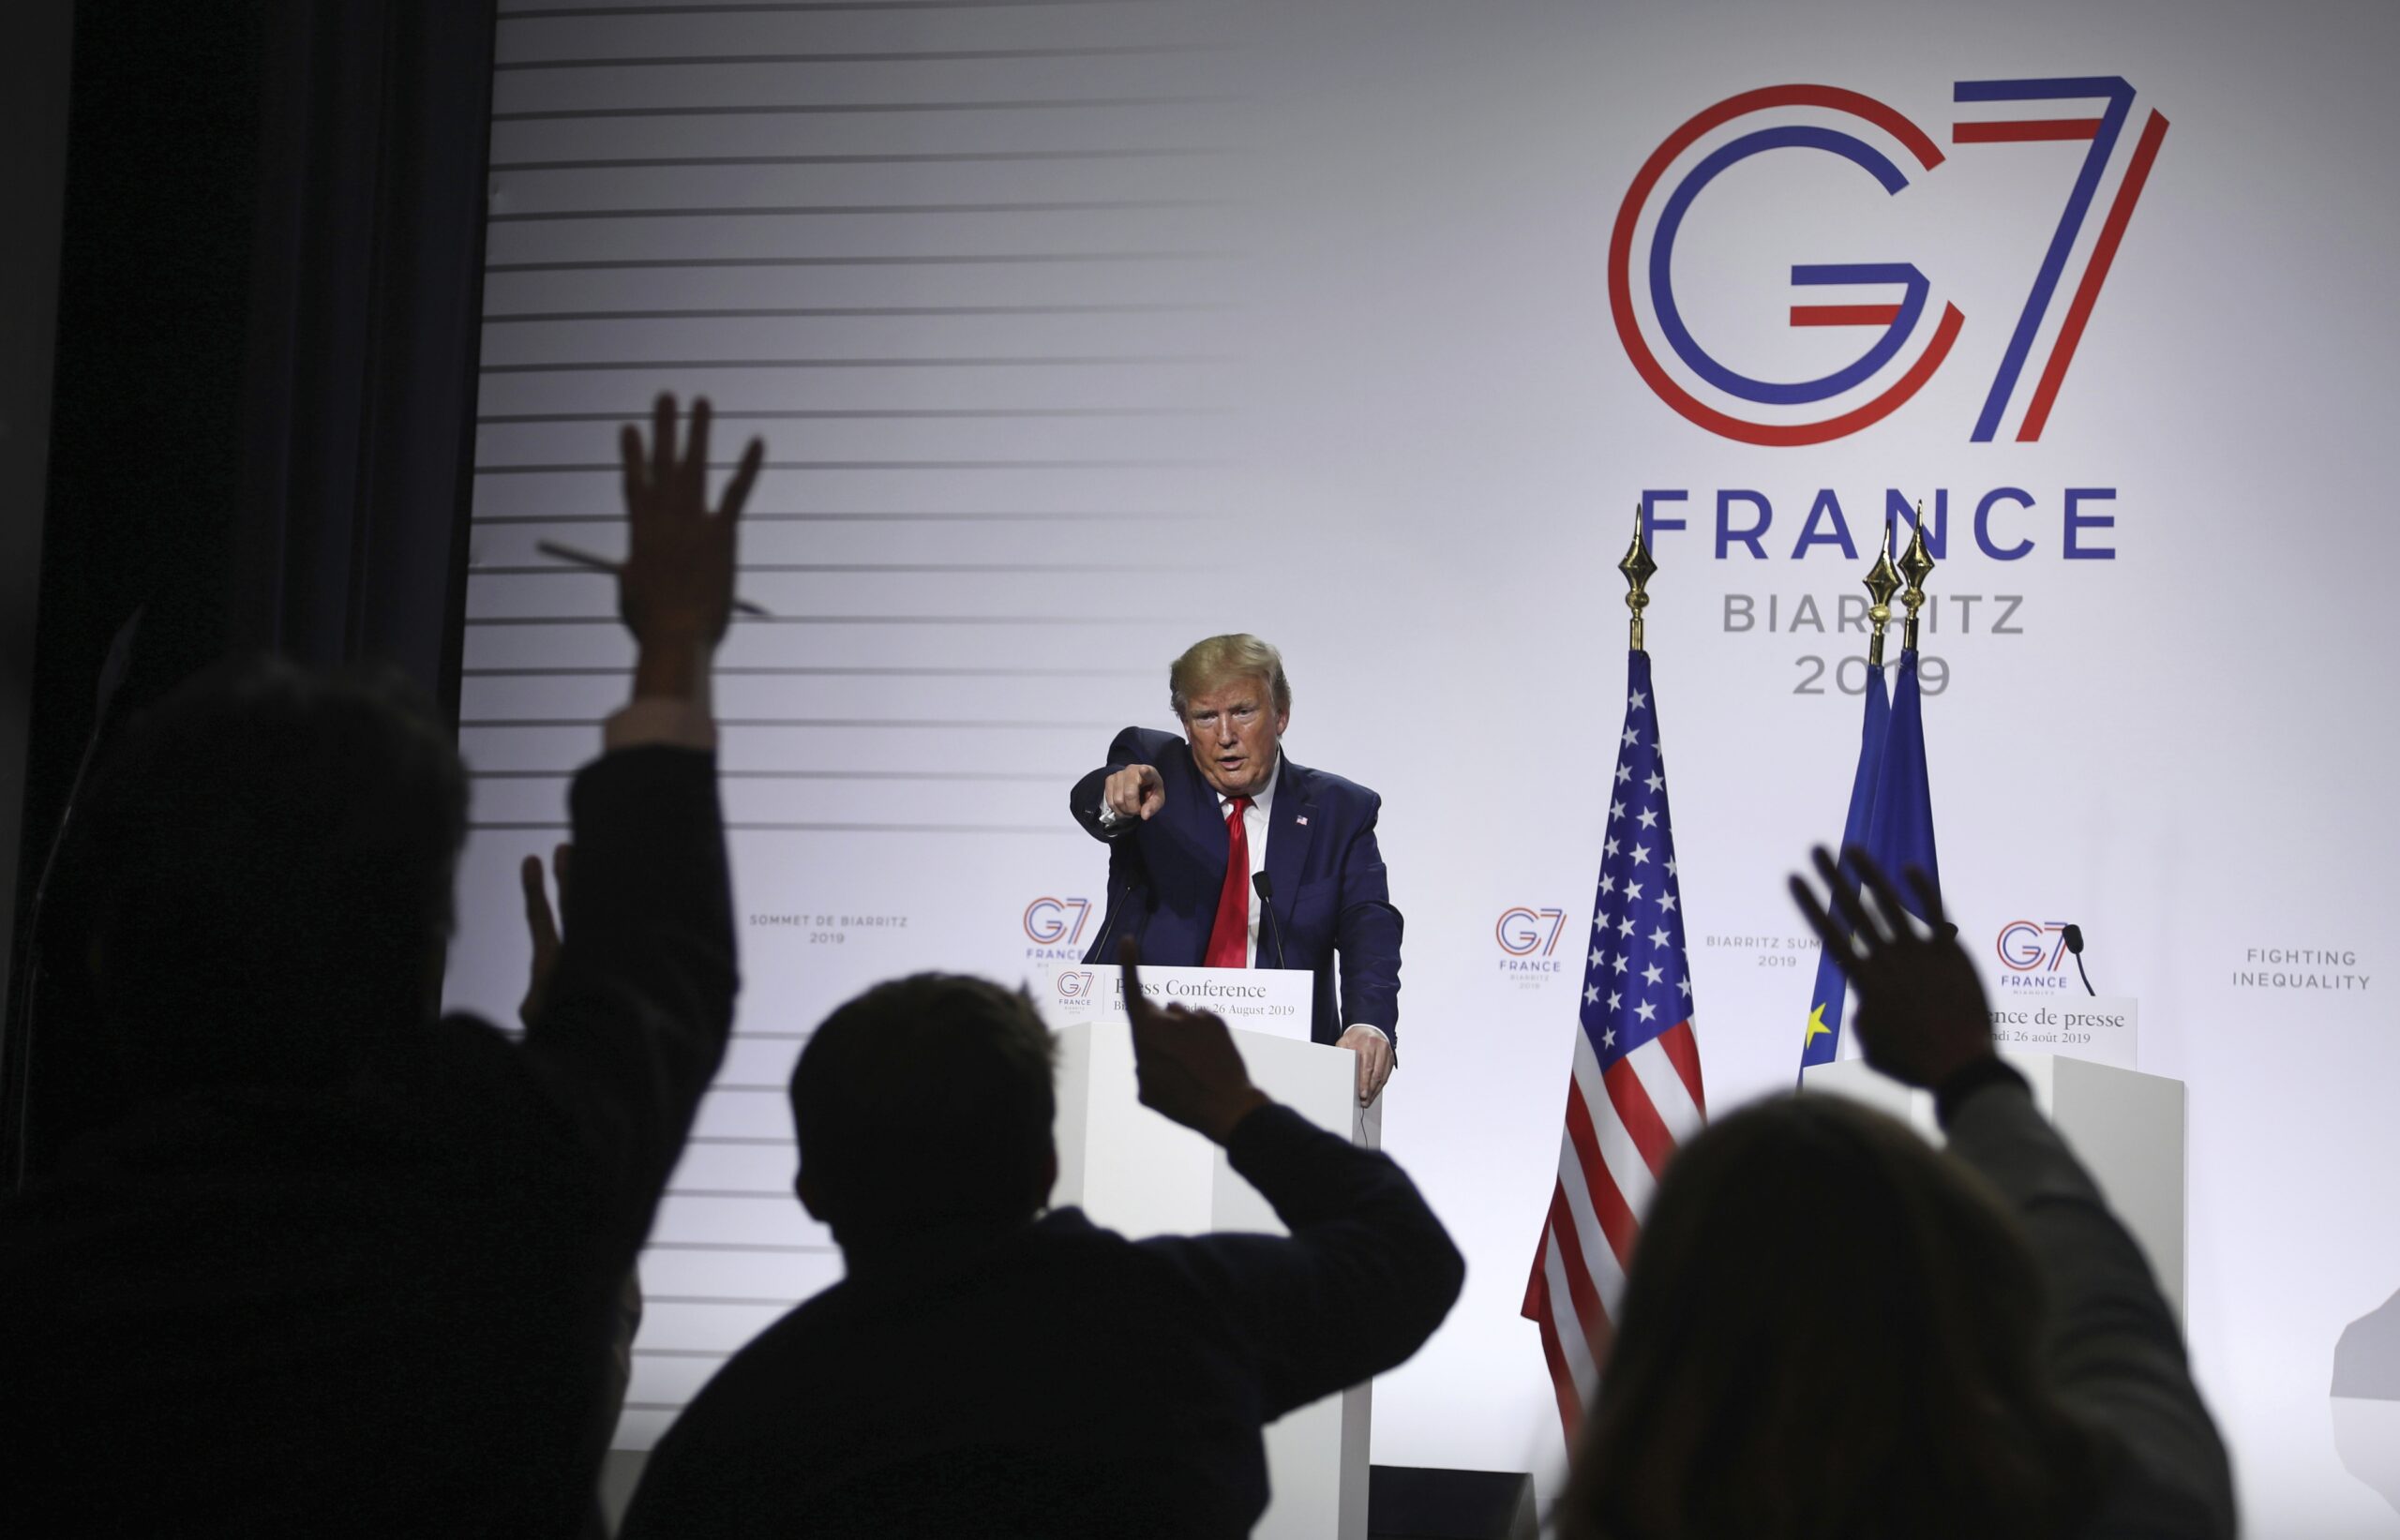 Donald Trump at G-7 summit in France